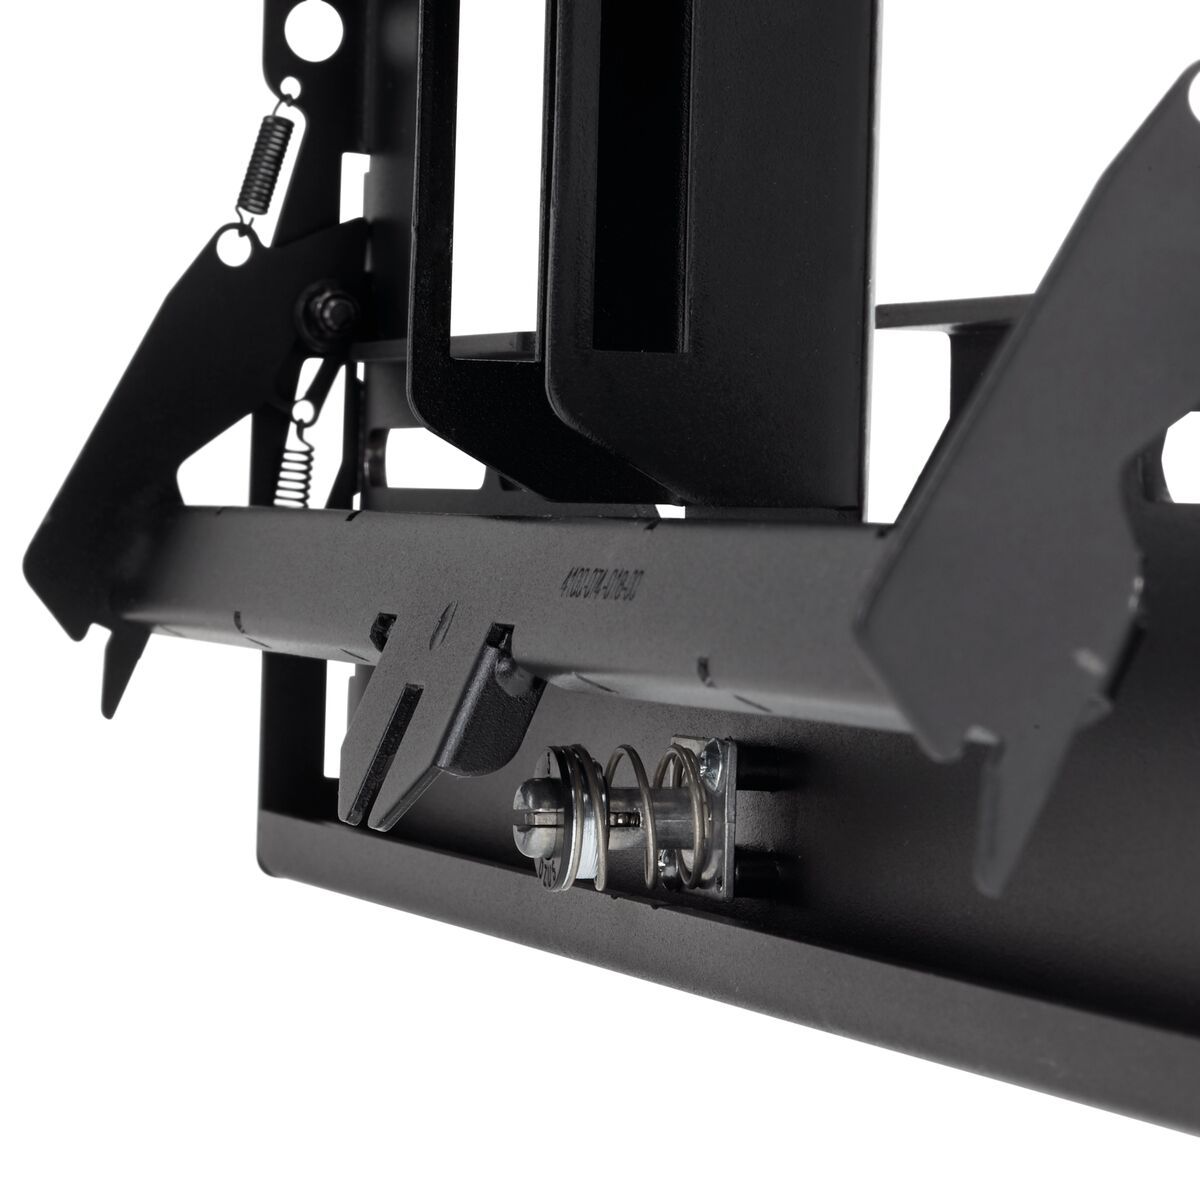 Vogel's PFW 6880 Video wall pop-out wall mount - Detail